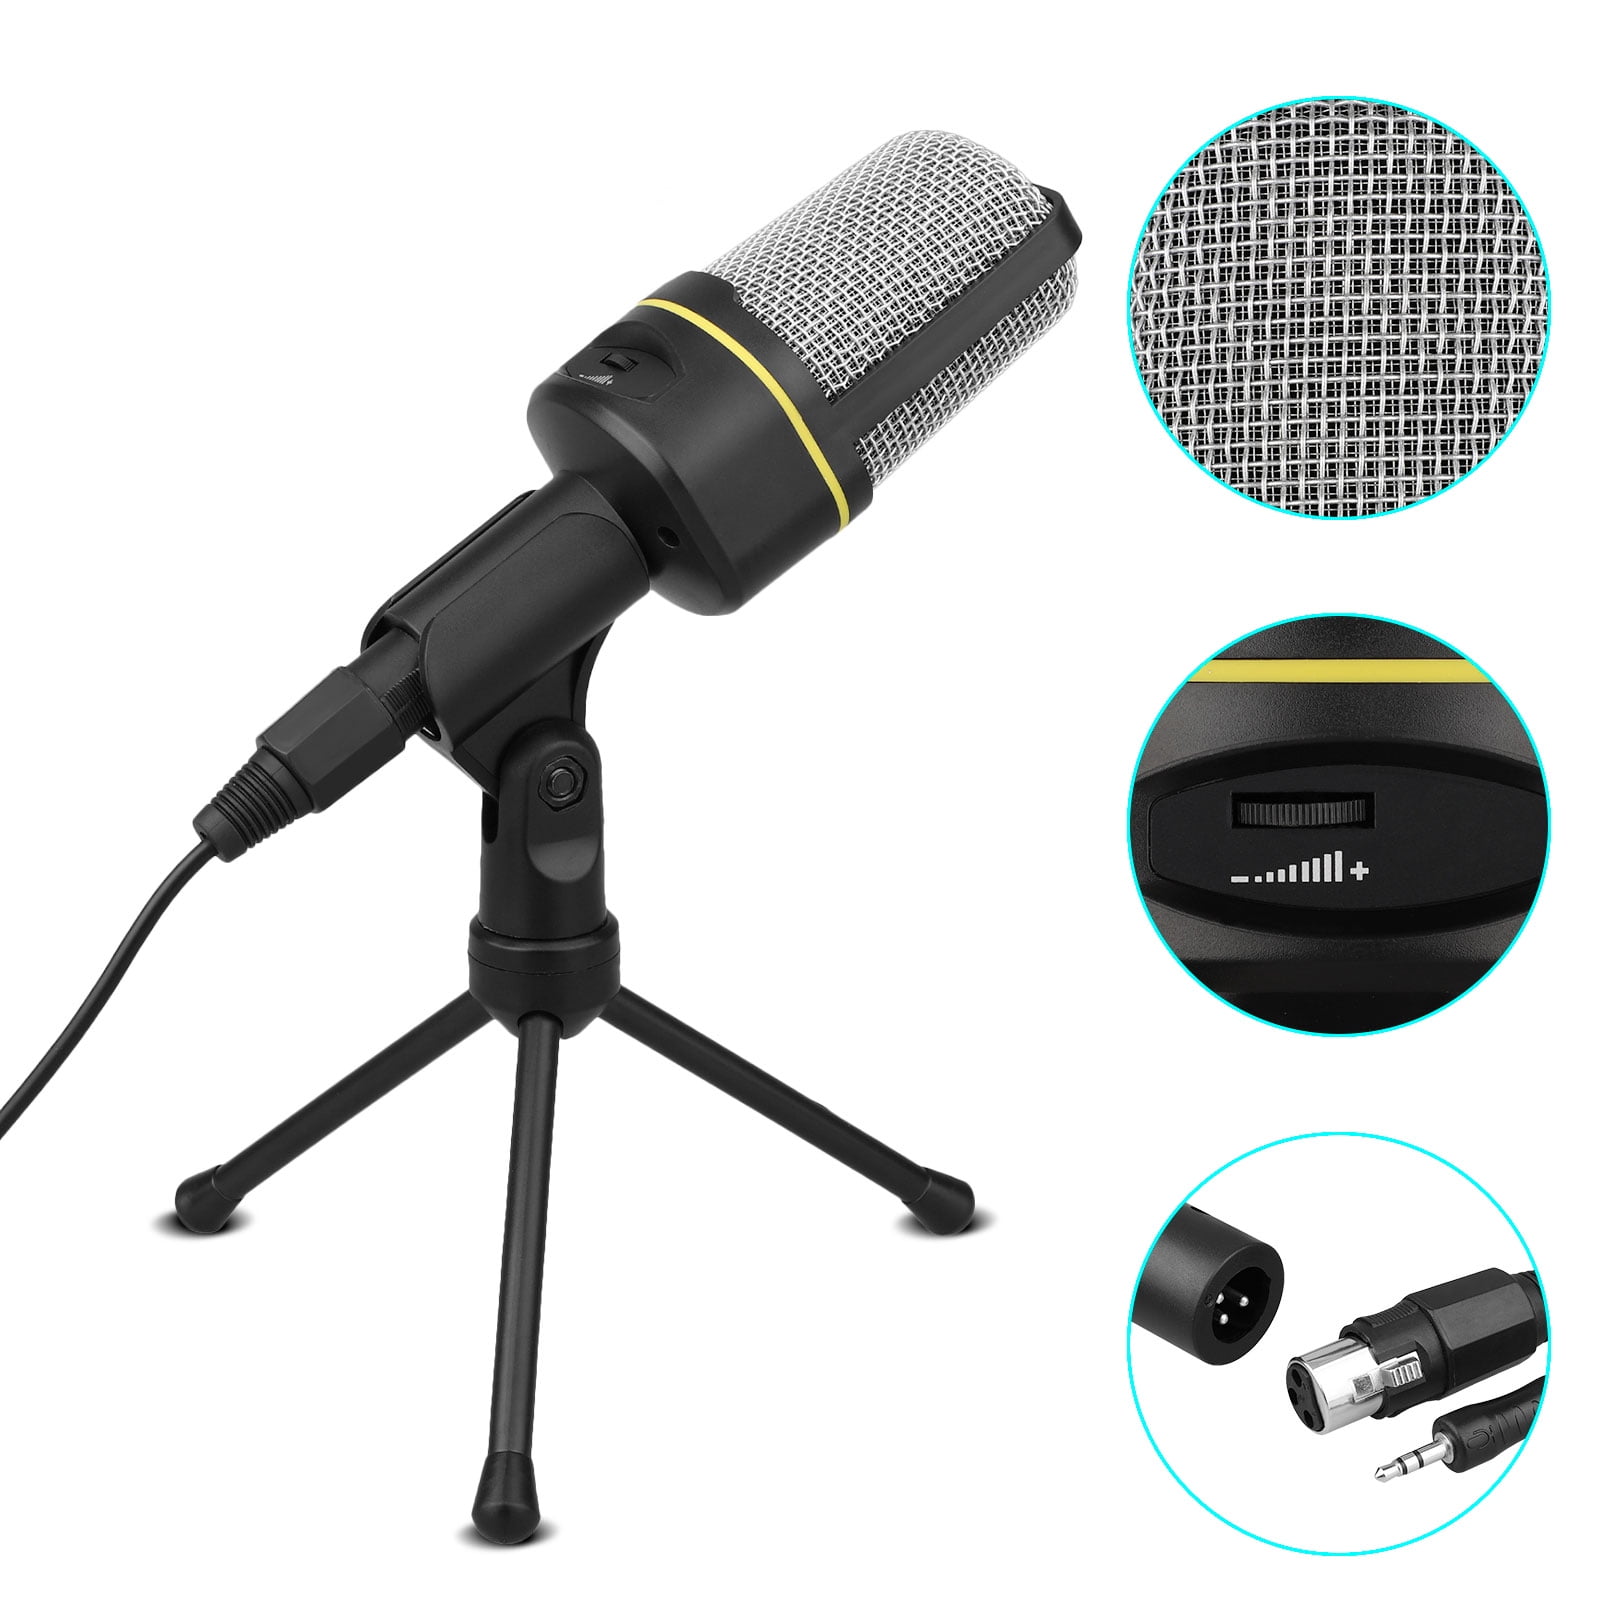 DEWIN Classic Stereo Microphone,Retro Microphone with 3.5MM Audio Cable Classic Dynamic Stereo Microphone Mic Accessories Parts for PC Notebook Computer 